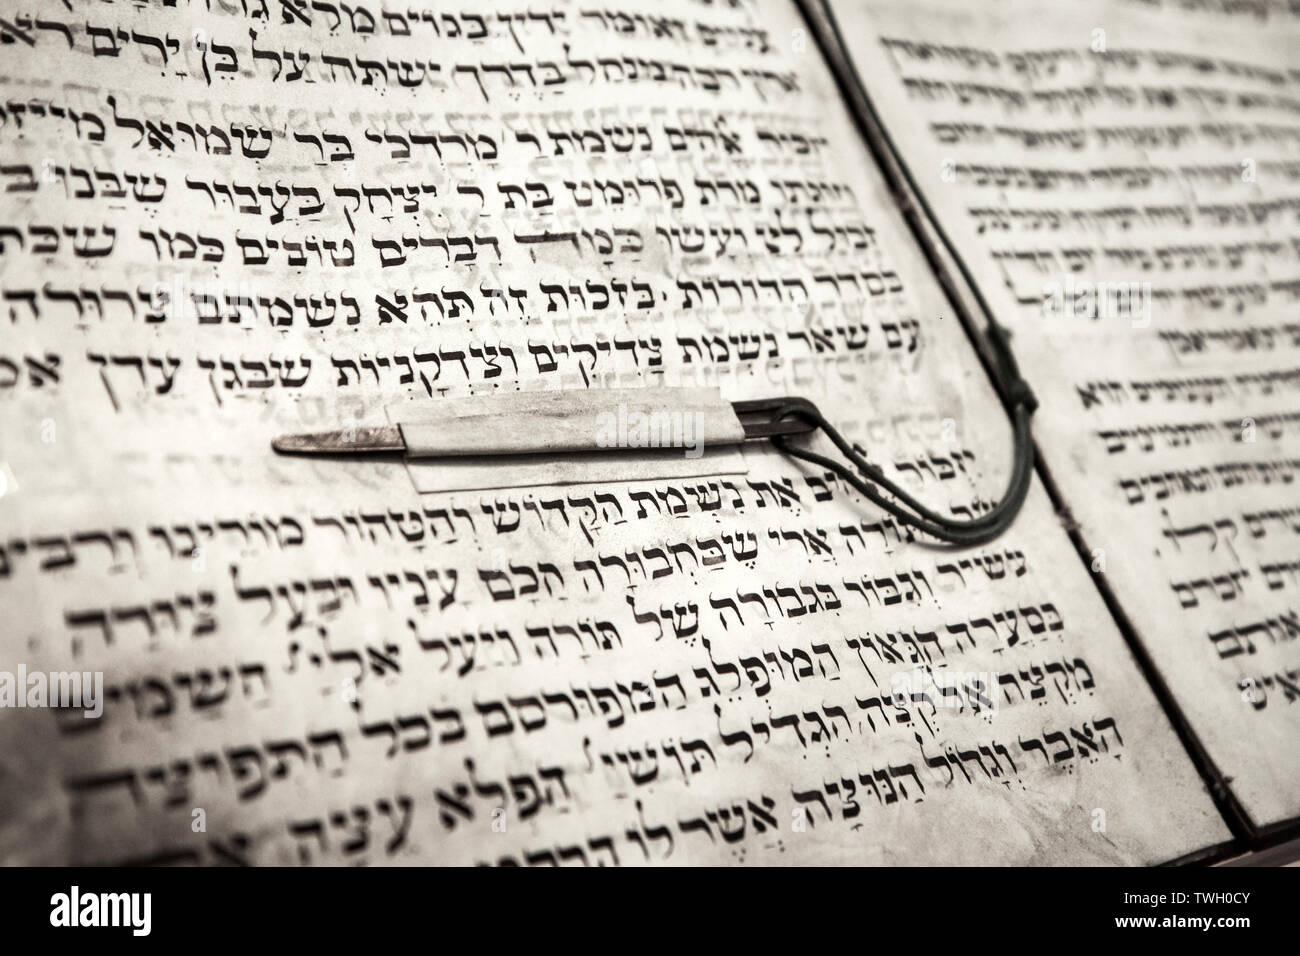 A detail of the text of an old jewish document. A page from the hebrew book. Stock Photo